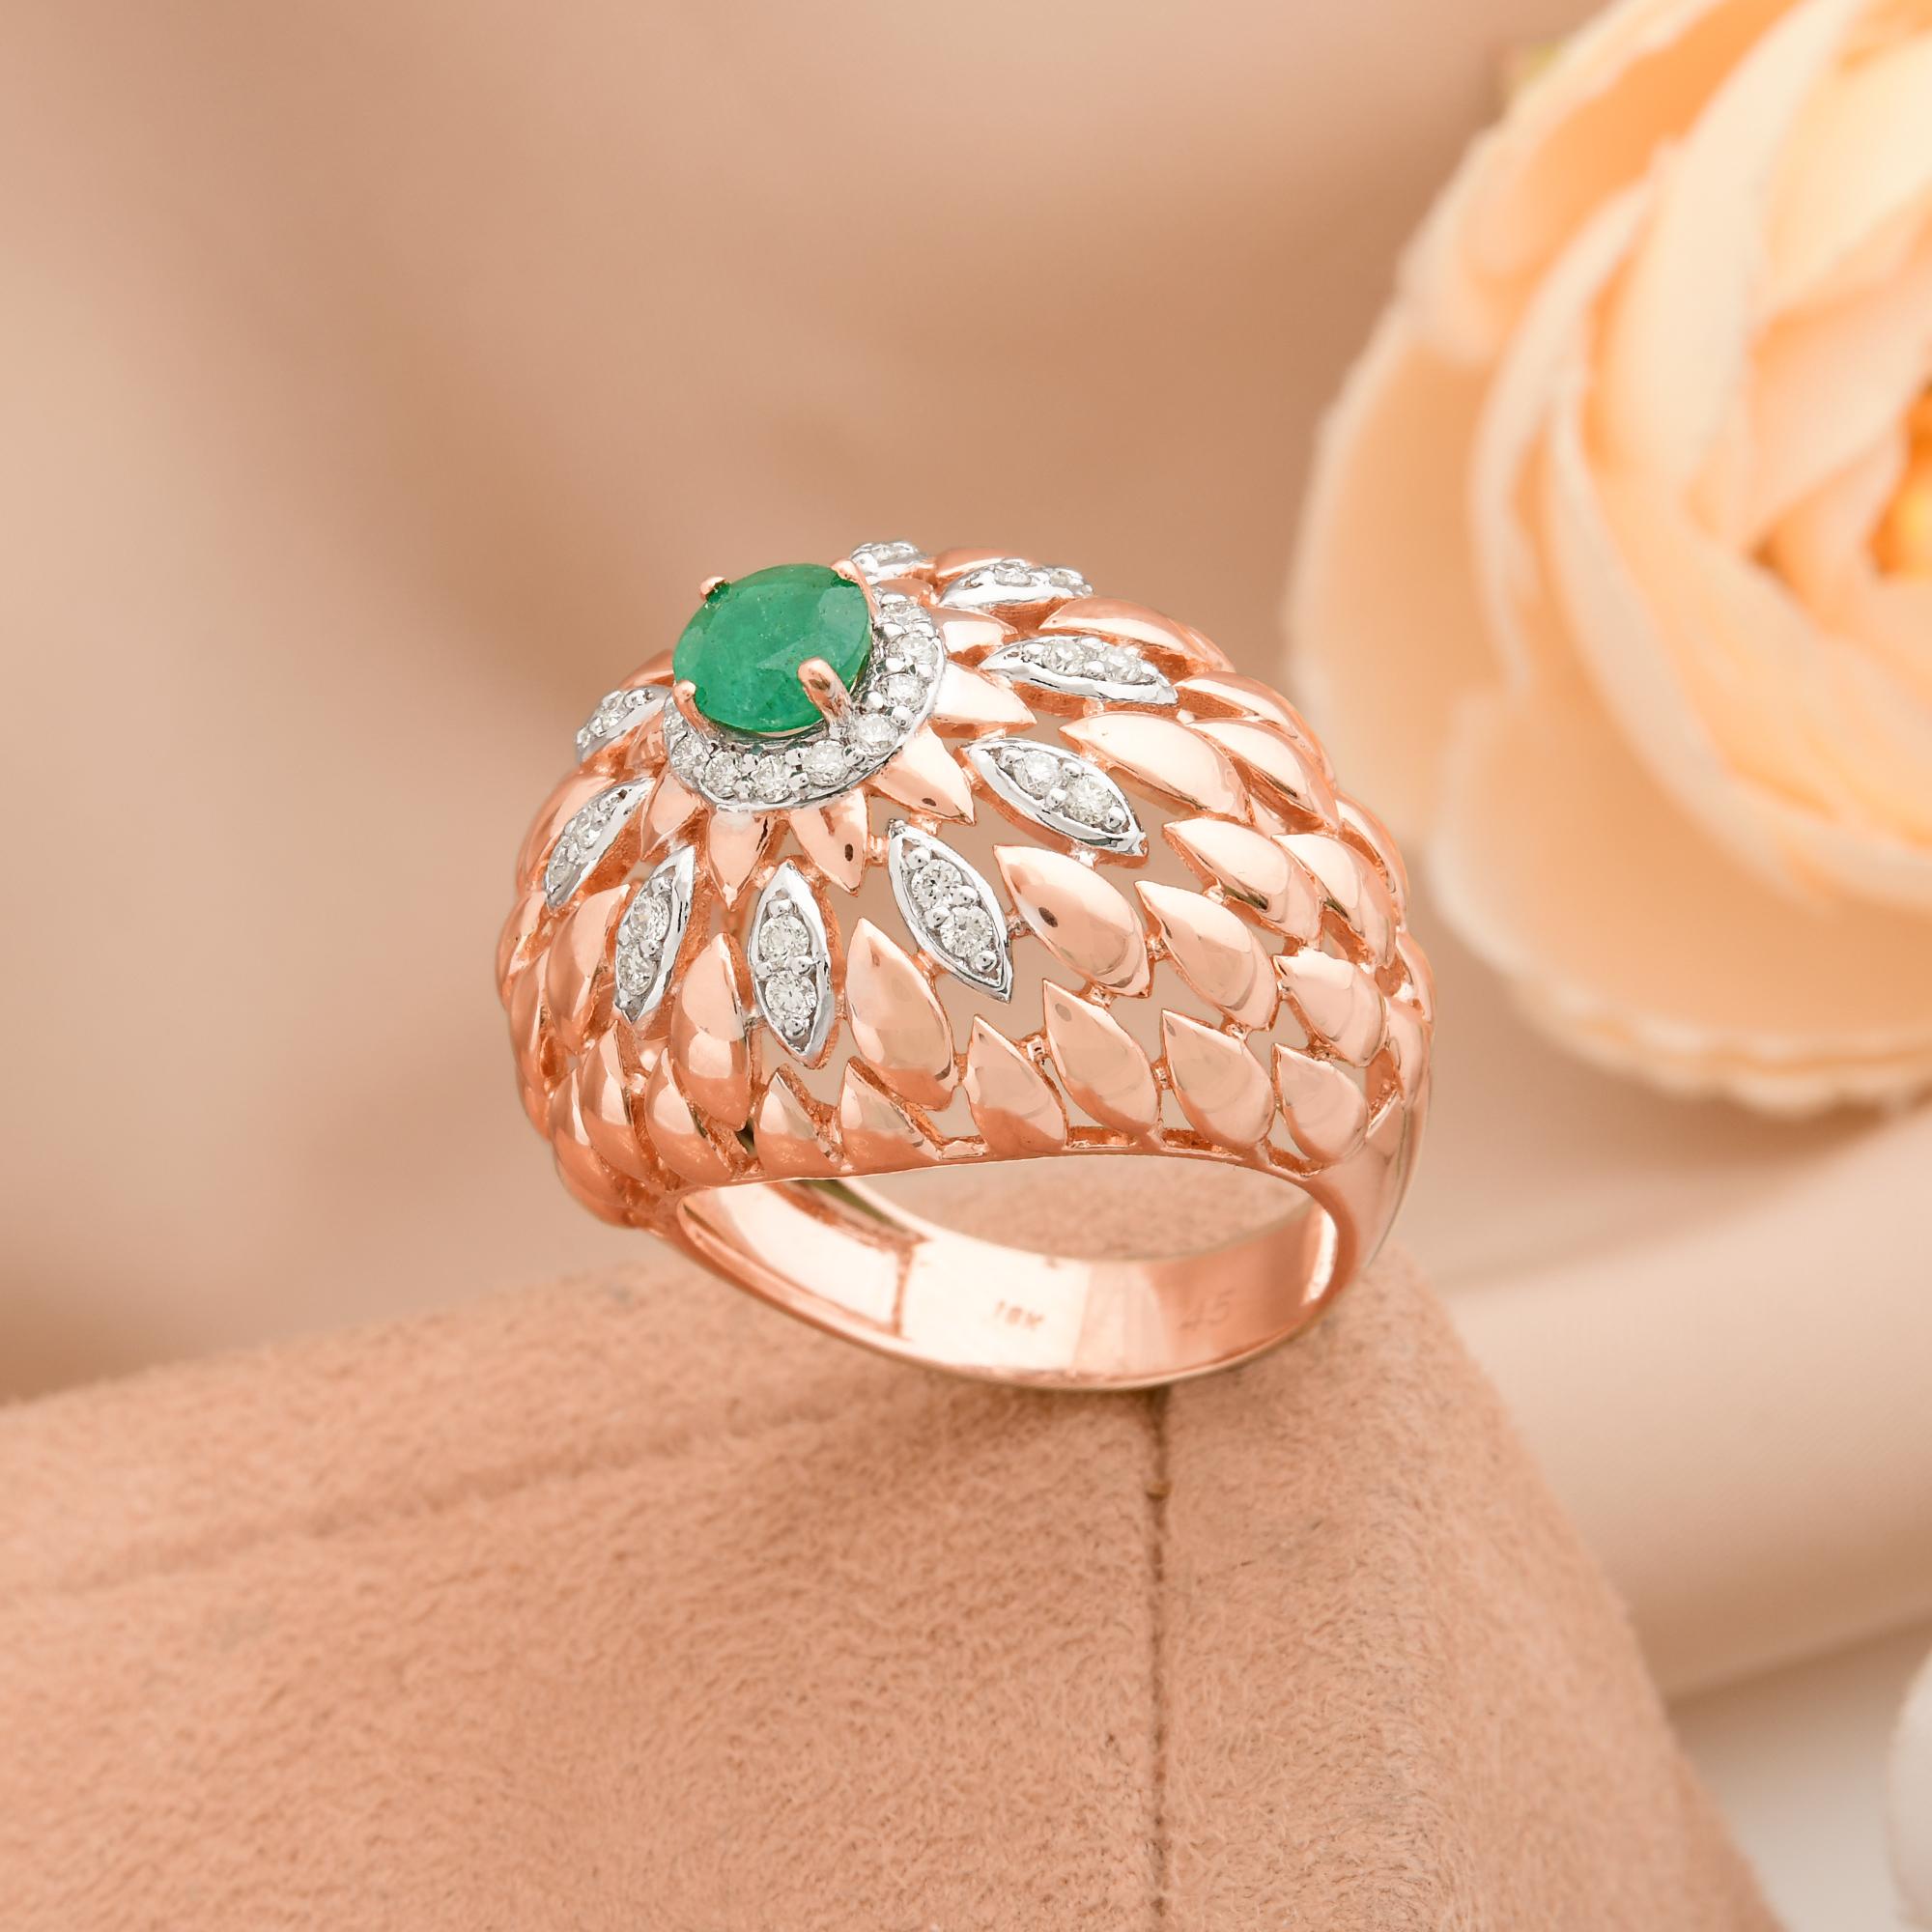 For Sale:  Natural Emerald Gemstone Dome Ring Diamond Pave Solid 18k Rose Gold Fine Jewelry 4